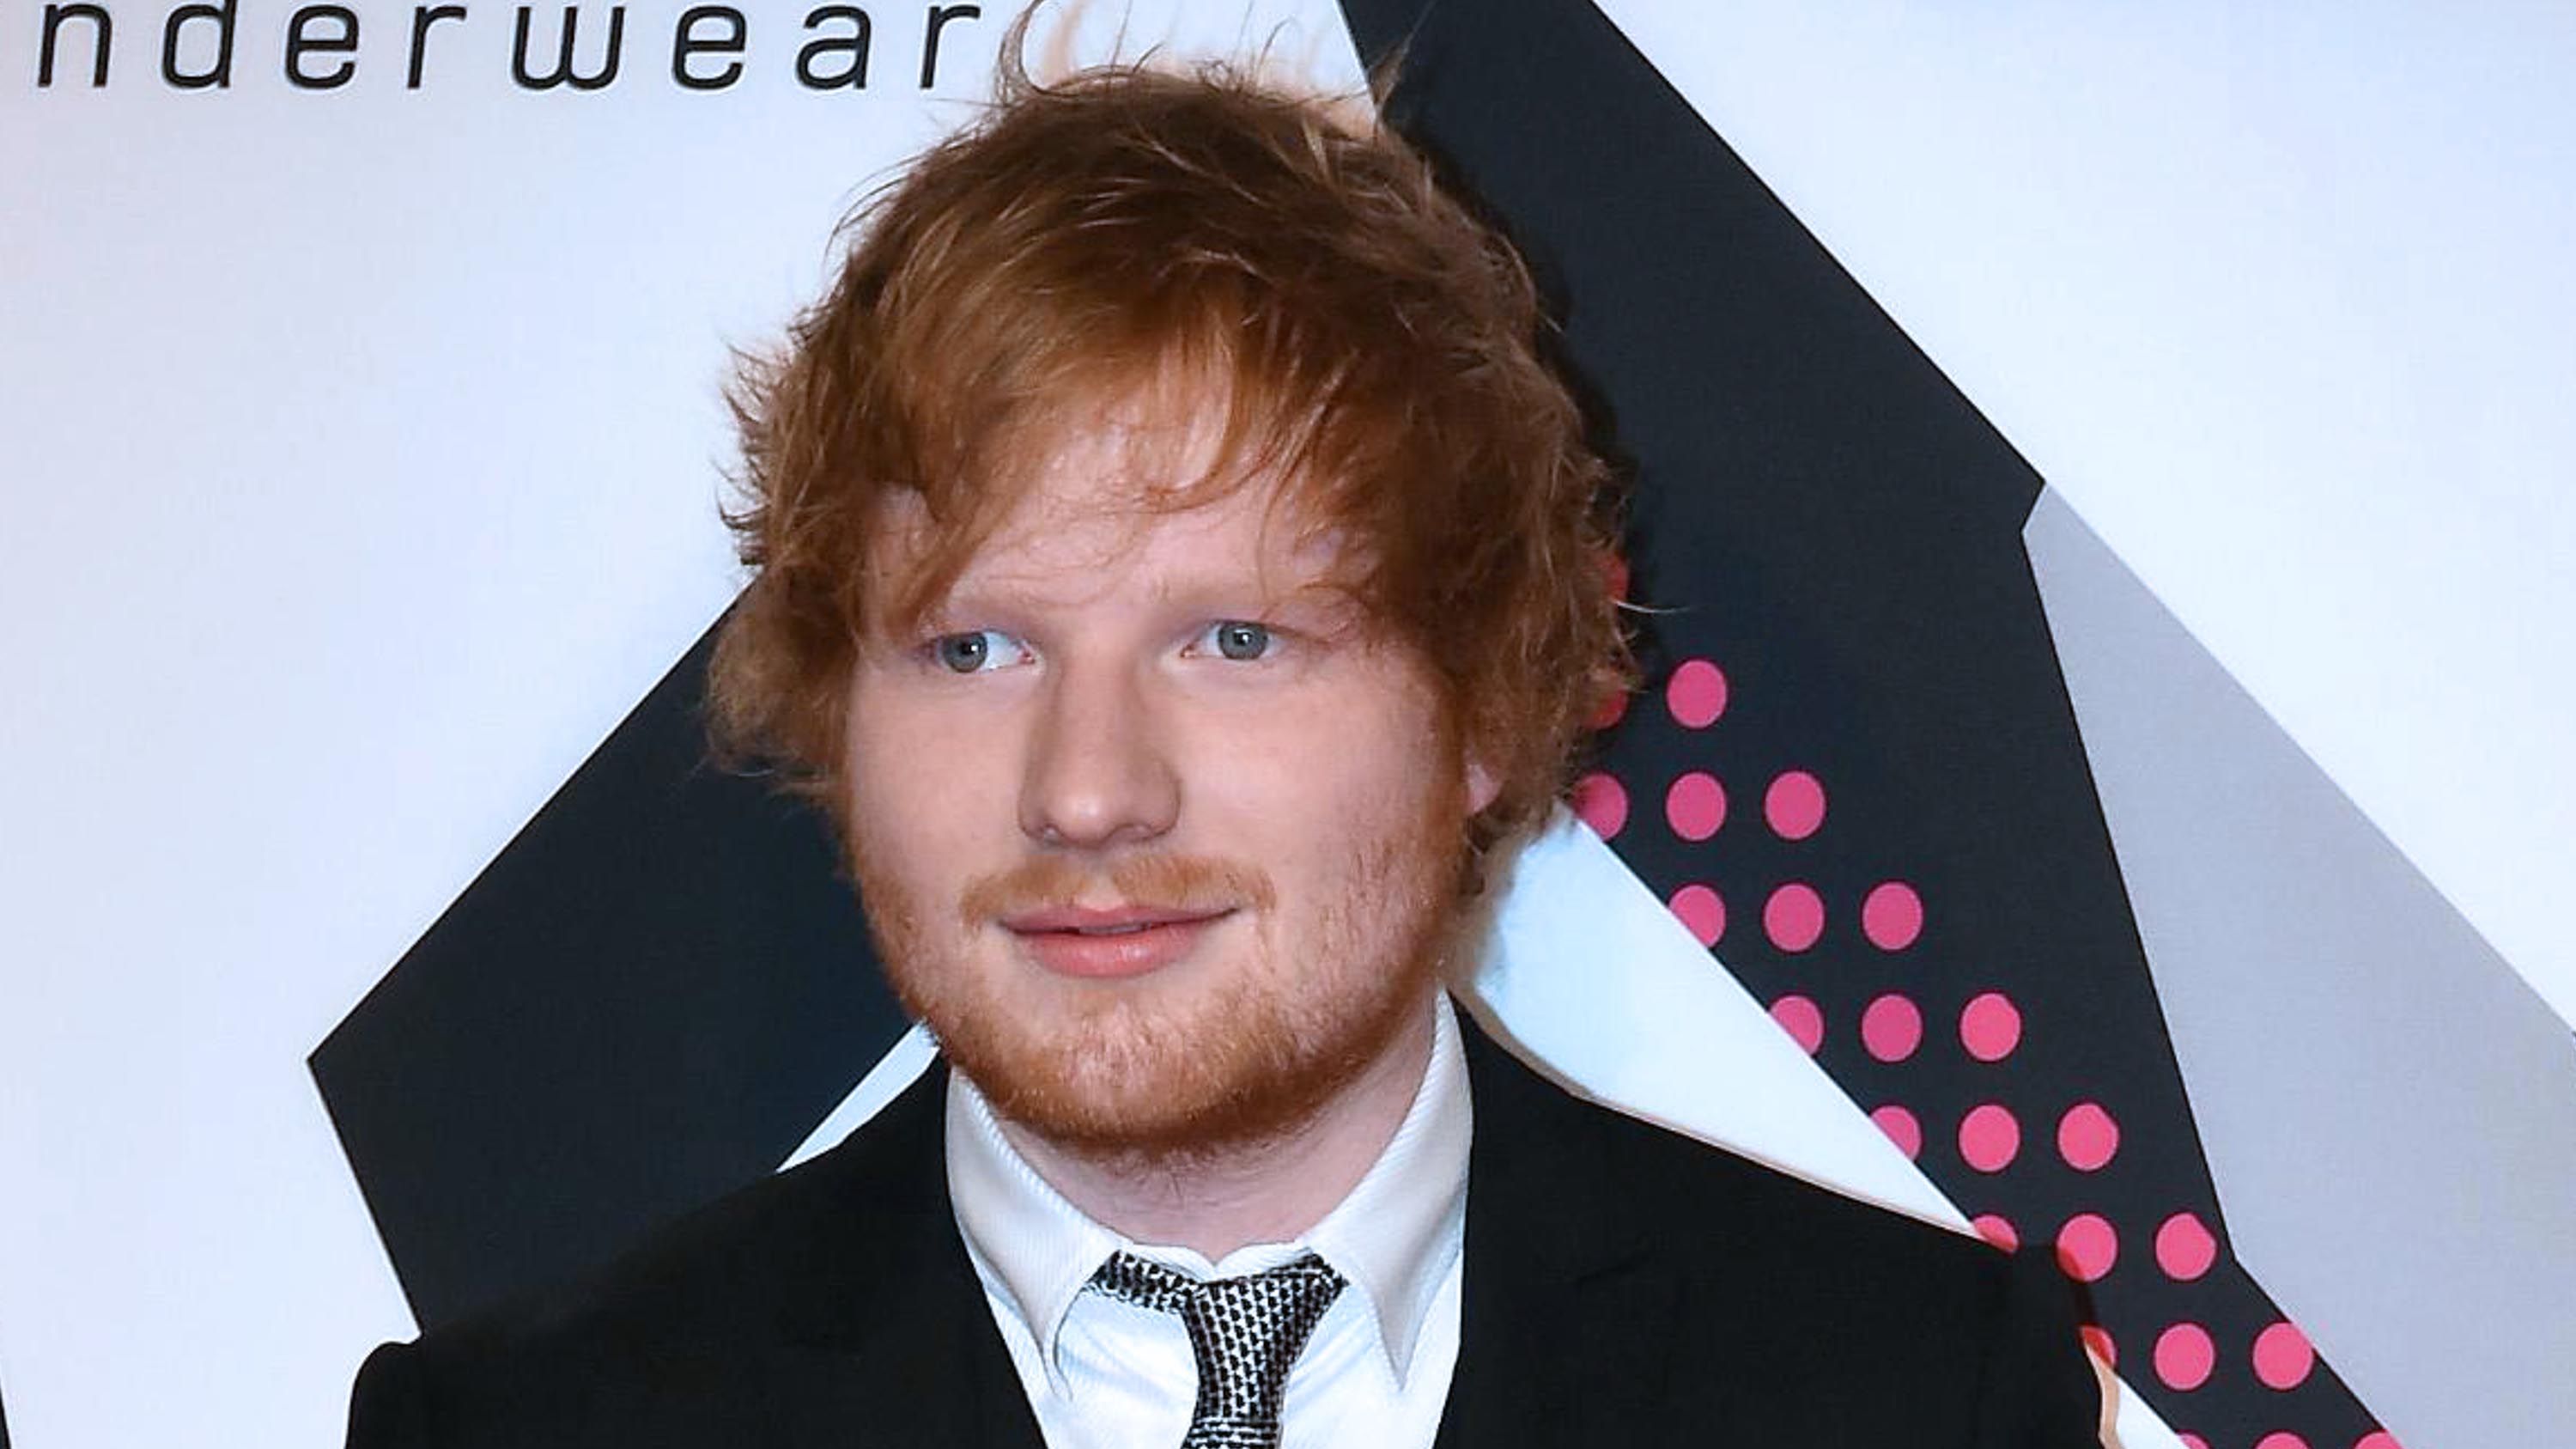 ED SHEERAN. The singer/songwriter is accused of copying Marvin Gaye's 'Let's Get It On.' File photo shows Ed at the MTV Europe Music Awards in 2015. Photo by Daniel Dal Zennaro/EPA  